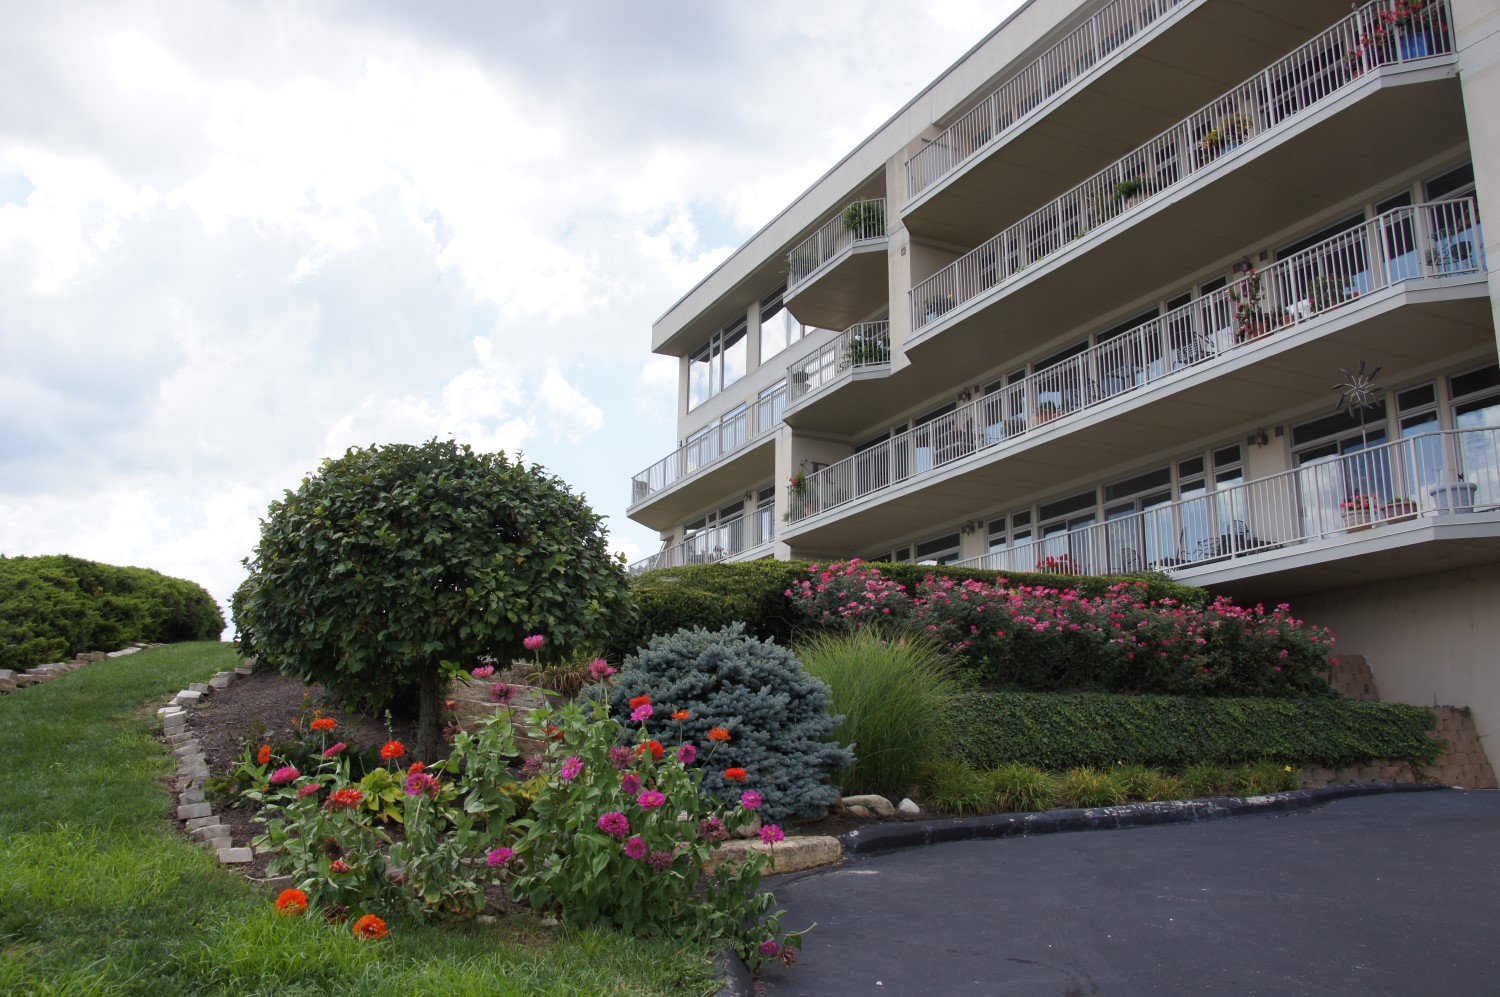   River View Balconies - Beatifully Landscaped  Grounds  